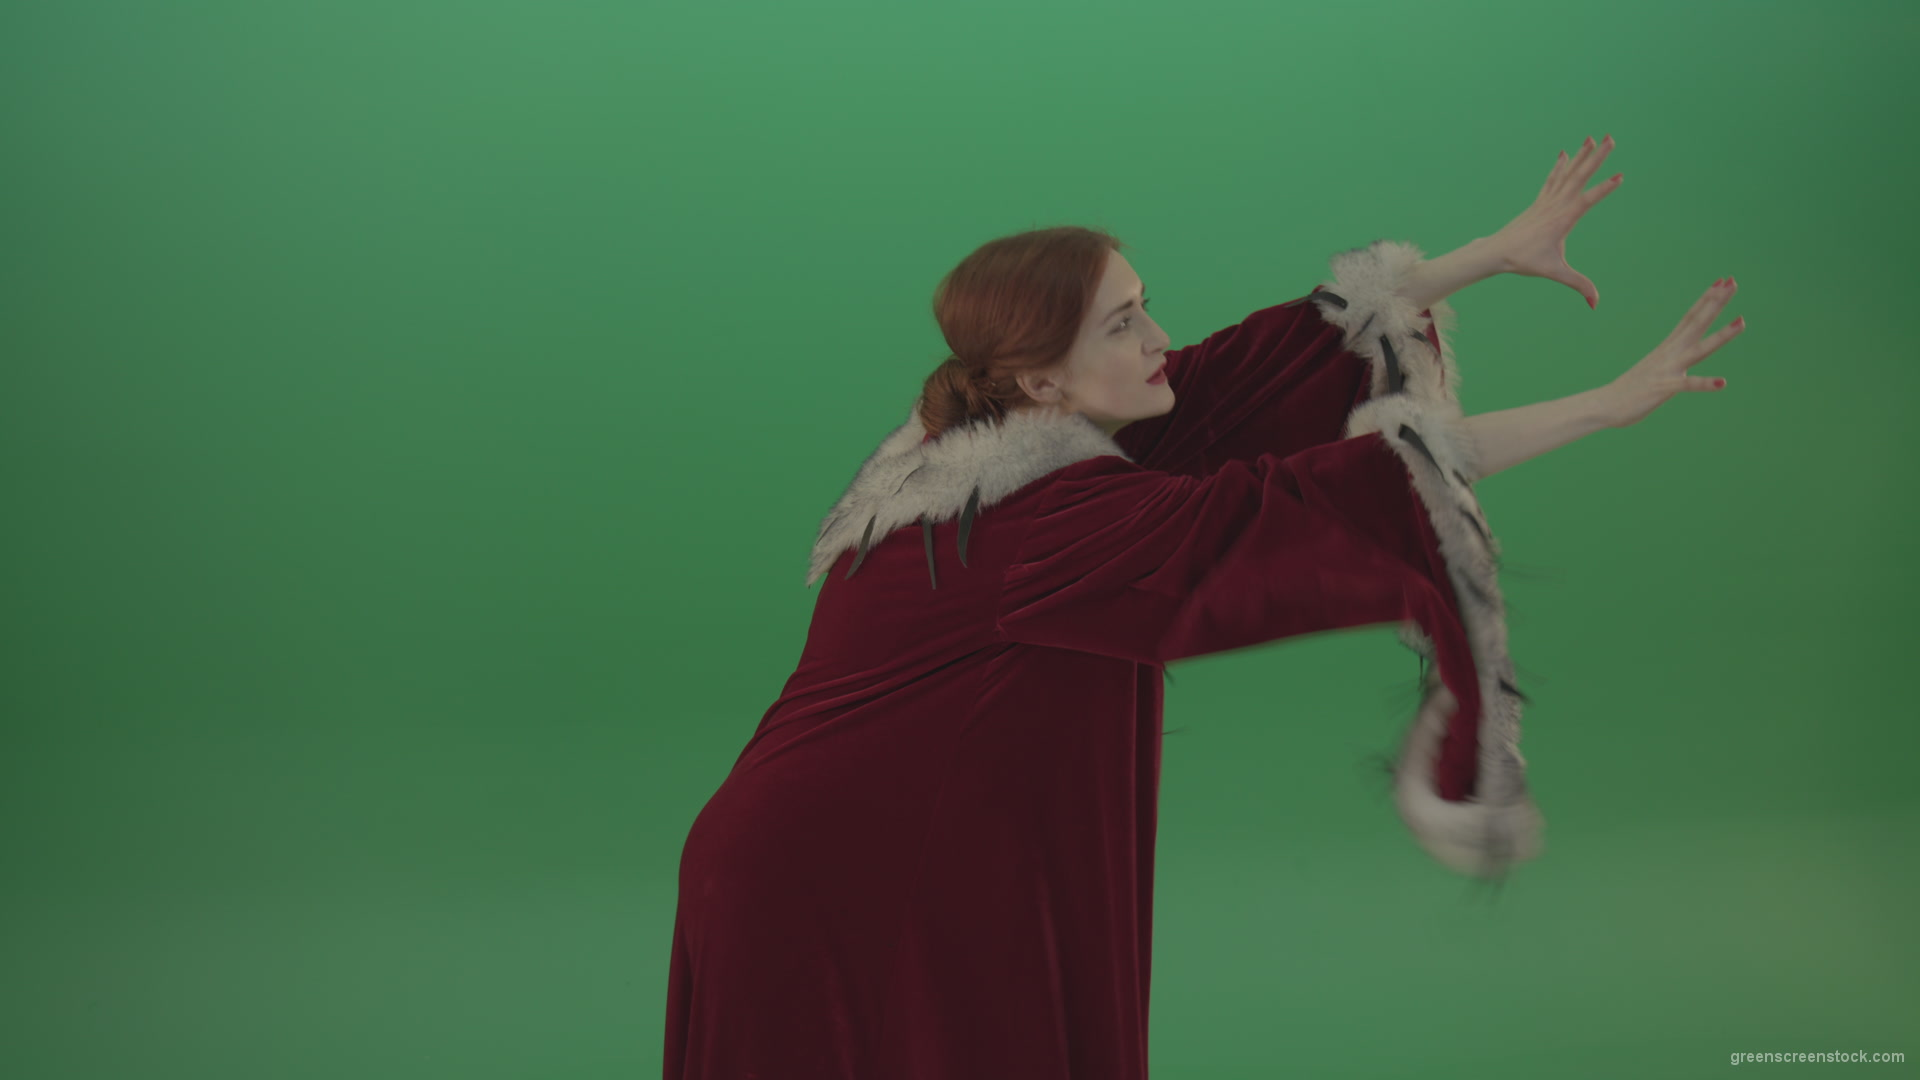 Girl-is-dressed-in-a-red-cloak-shoots-proton-lasers-_004 Green Screen Stock